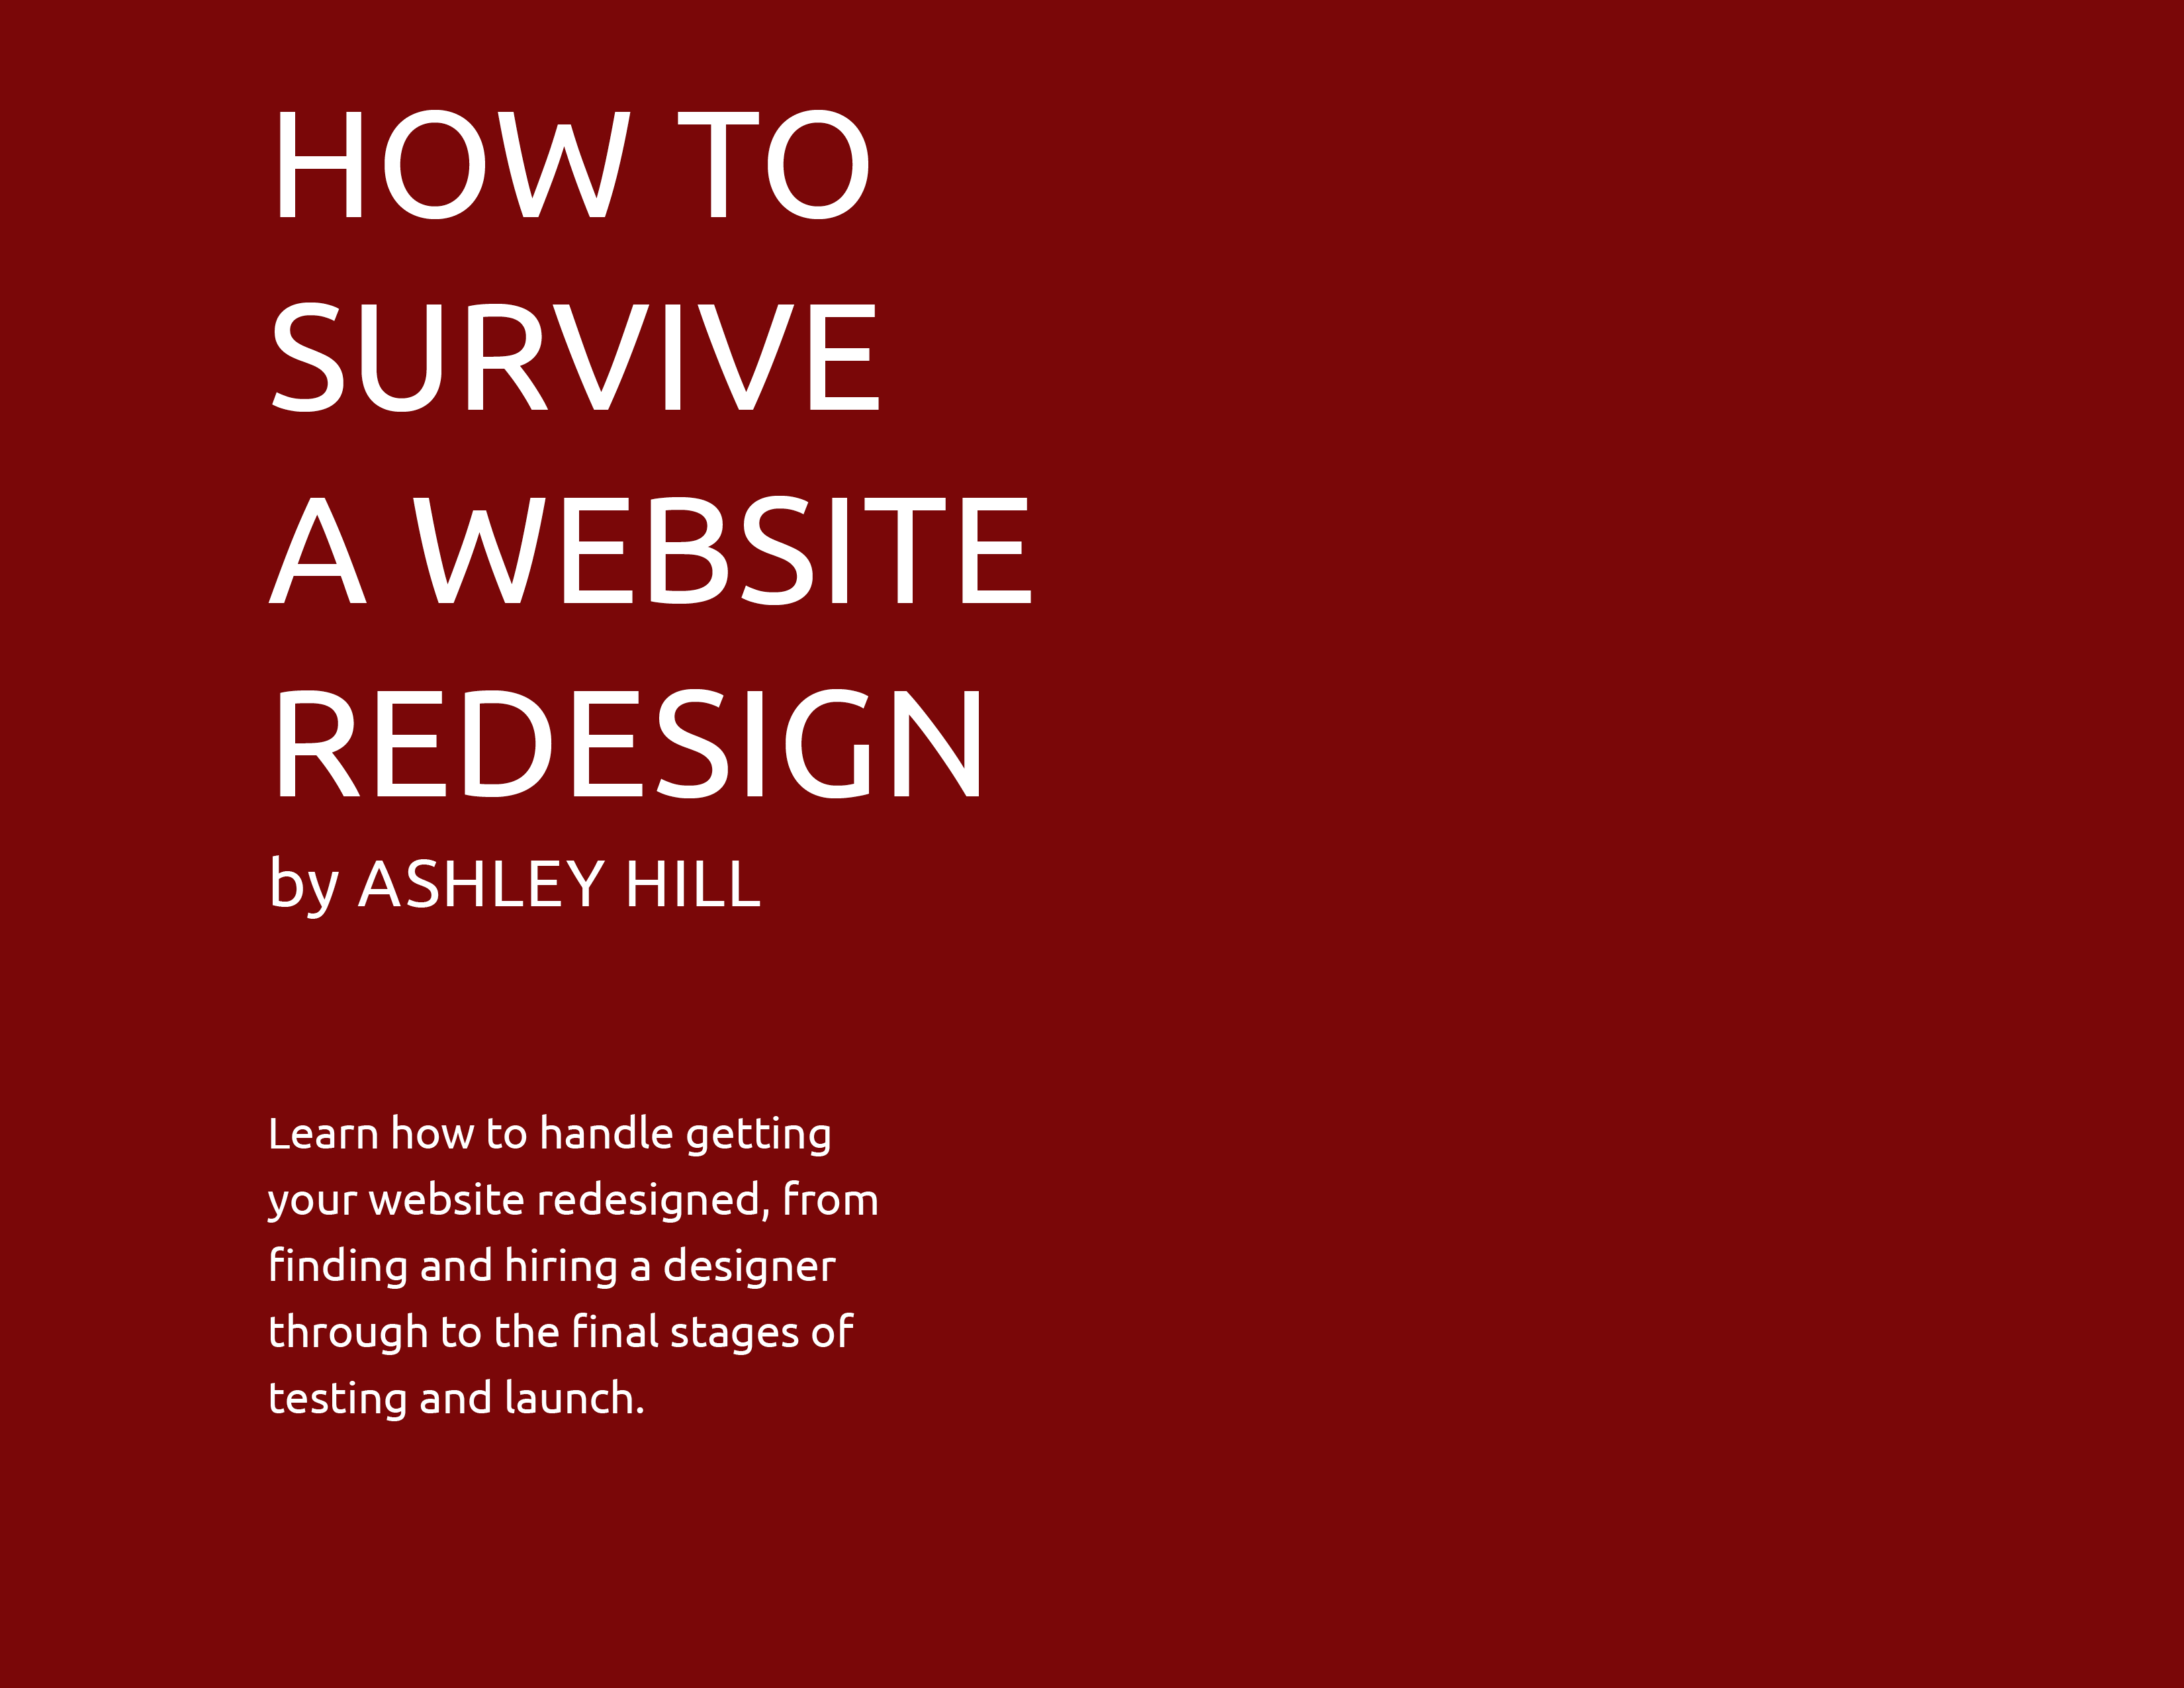 How to Survive a Website Redesign